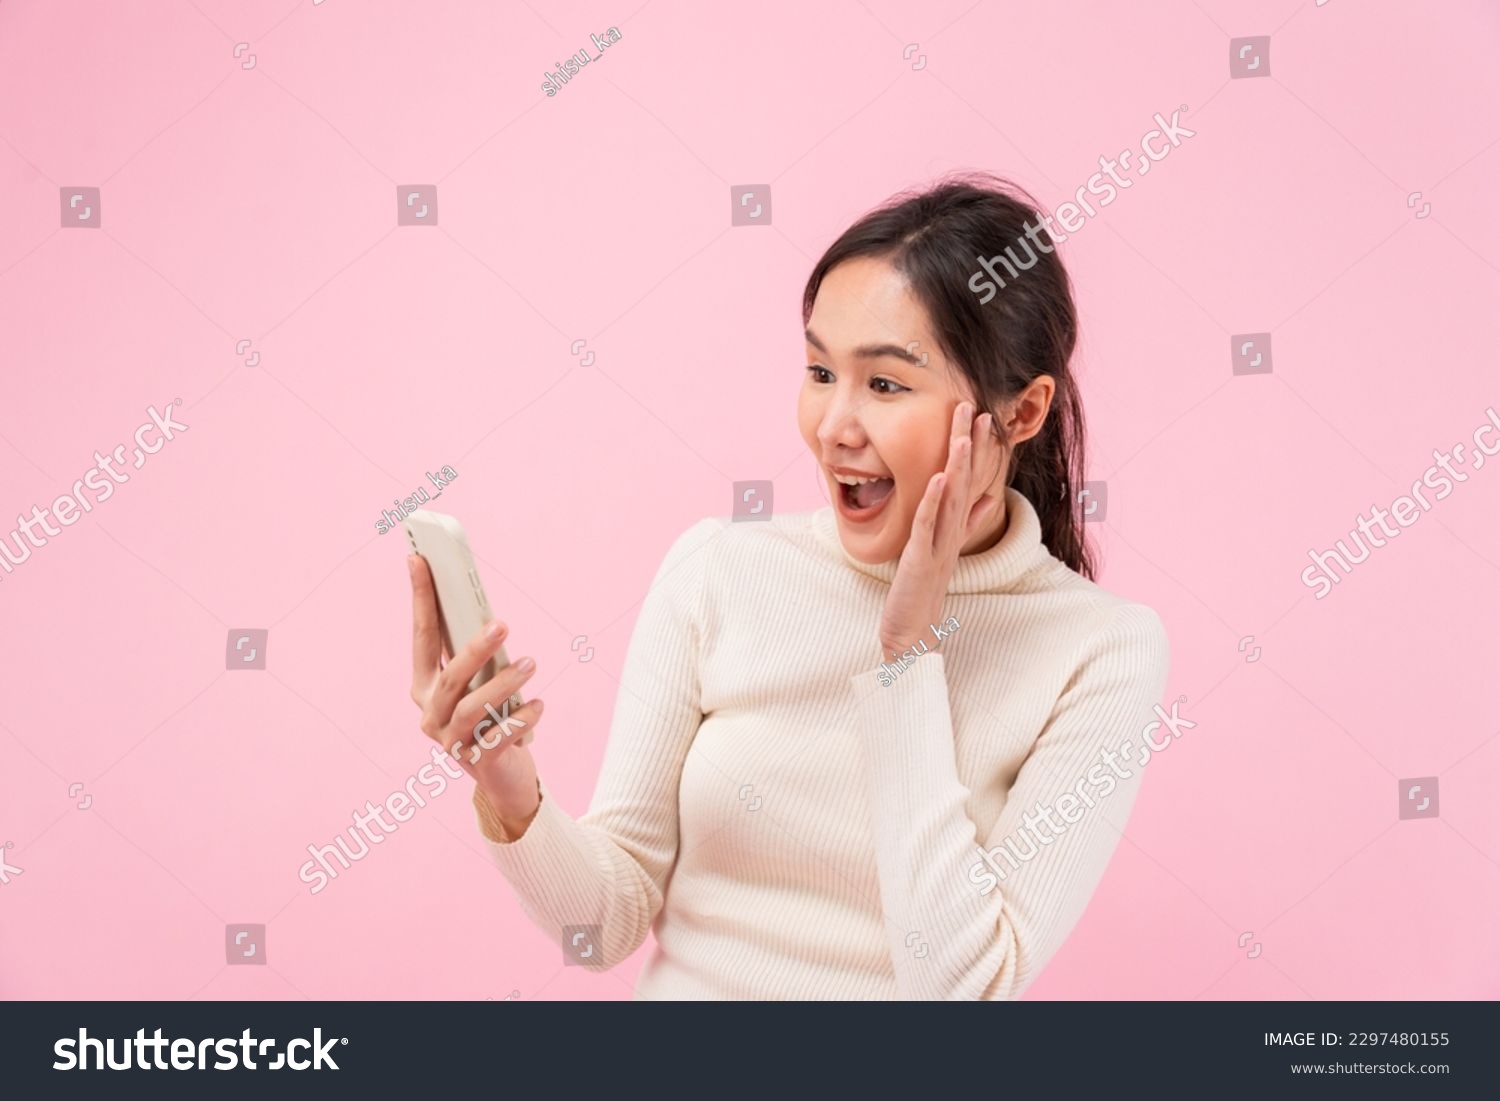 Asian beautiful woman exited surprise face expression . female feels shocked. exciting smile and happy adorable rejoices. Very enjoy and fun relax time. wow, girl holding smartphone. Smile.
 #2297480155